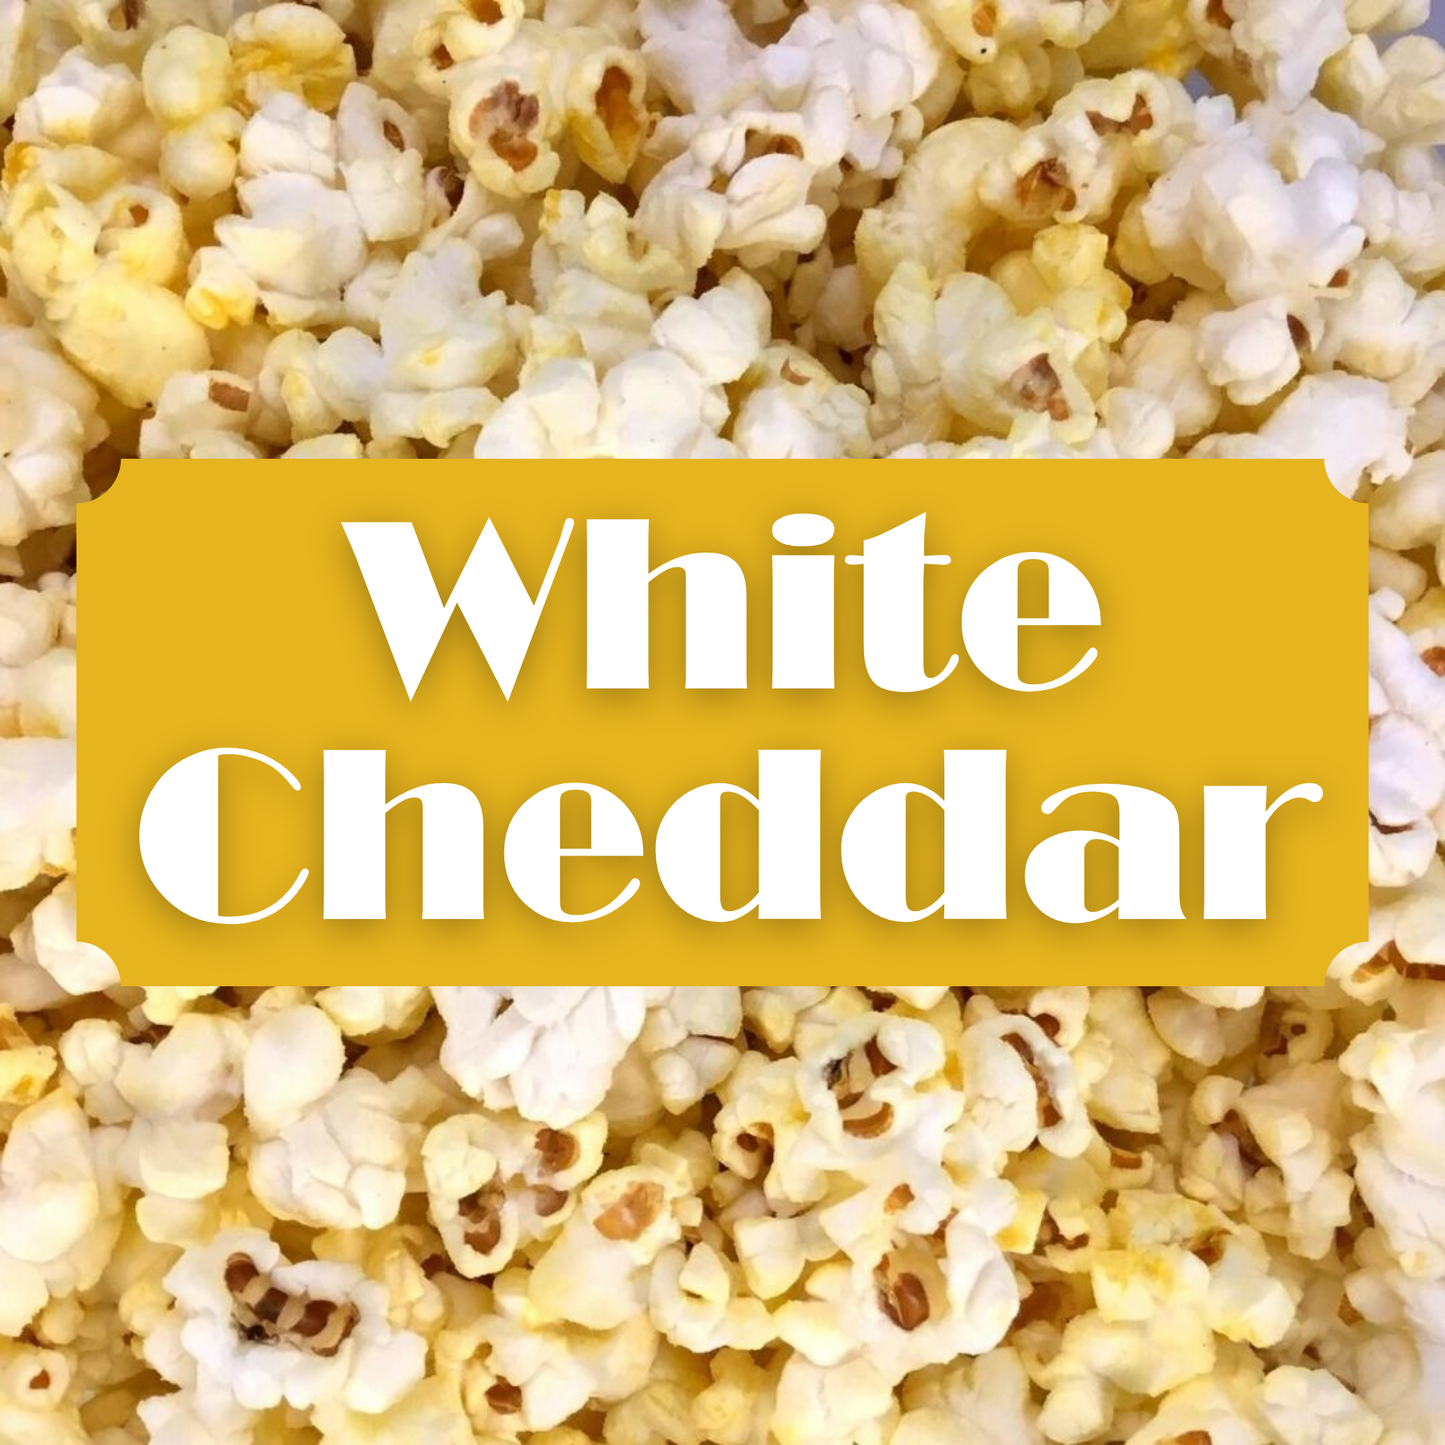 White Cheddar Popcorn Large Bags - Case of 8 ($2.99ea)